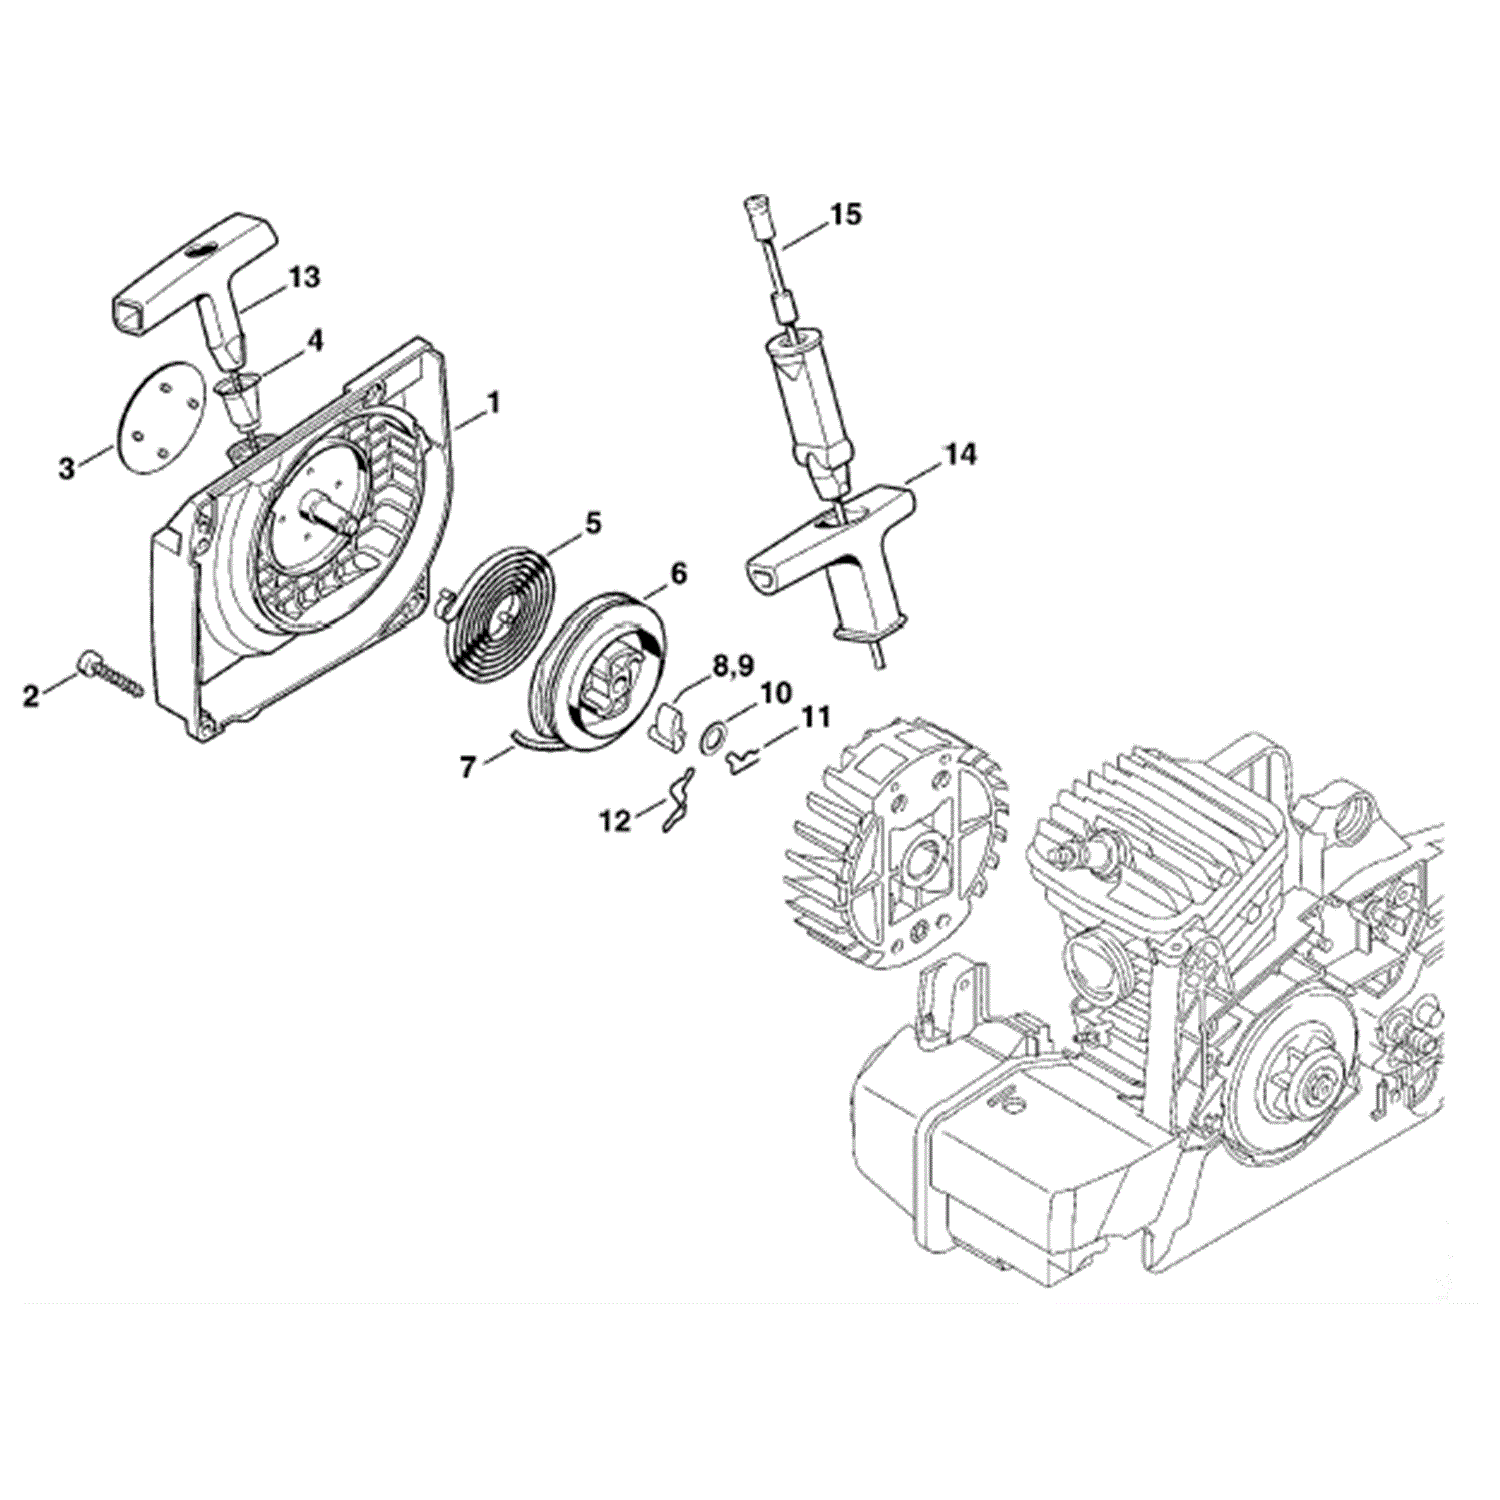 Stihl MS 390 Chainsaw (MS390) Parts Diagram, Fan housing with rewind